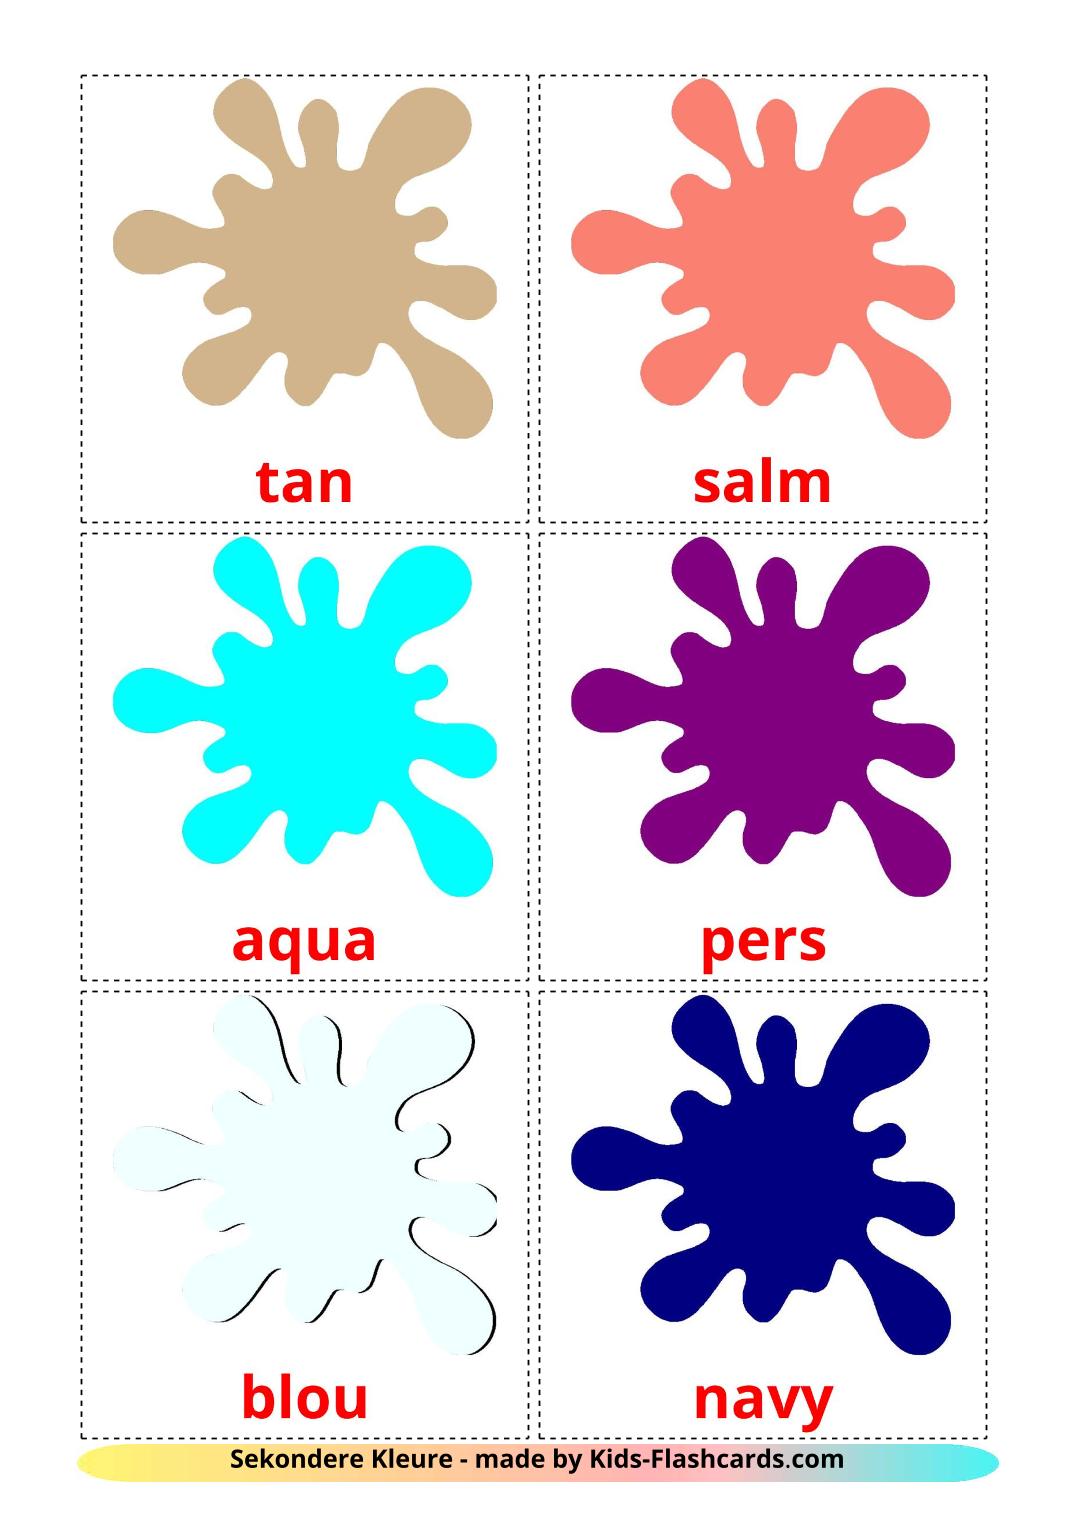 Secondary colors - 20 Free Printable afrikaans Flashcards 